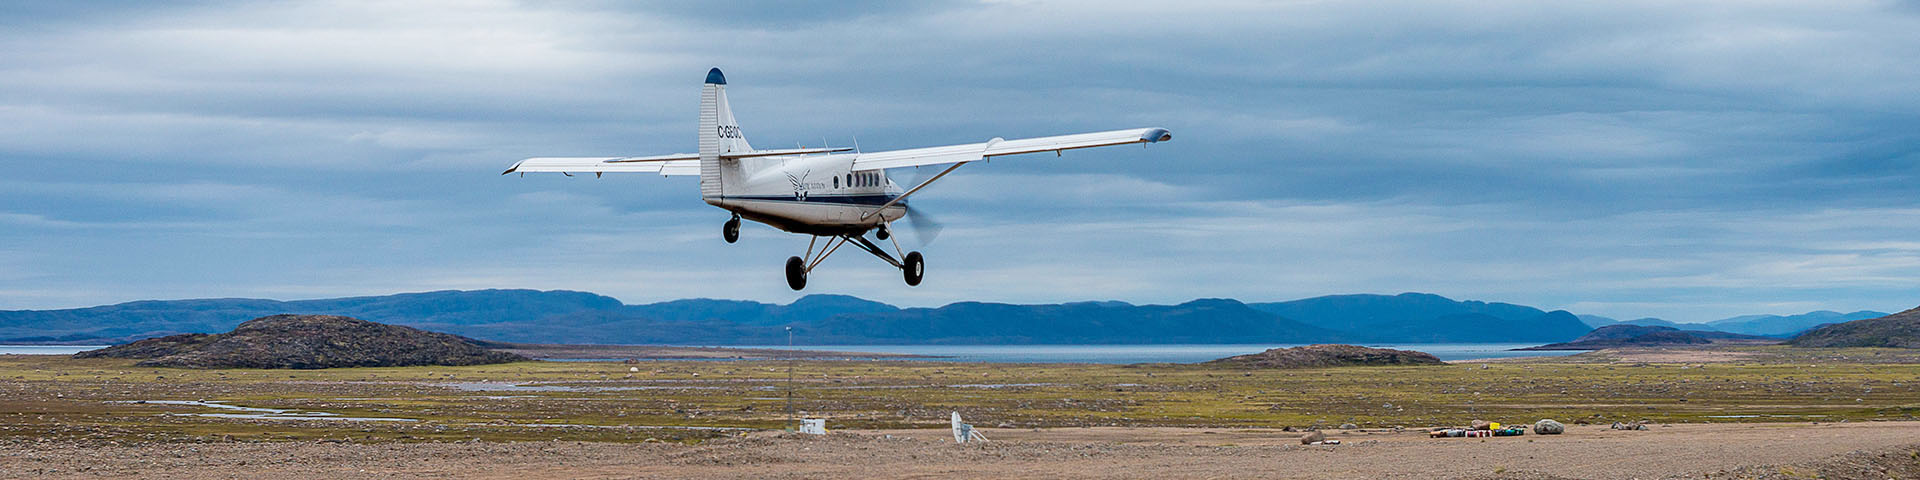 A small plane landing on a dirt runway with tundra scenery in the background.